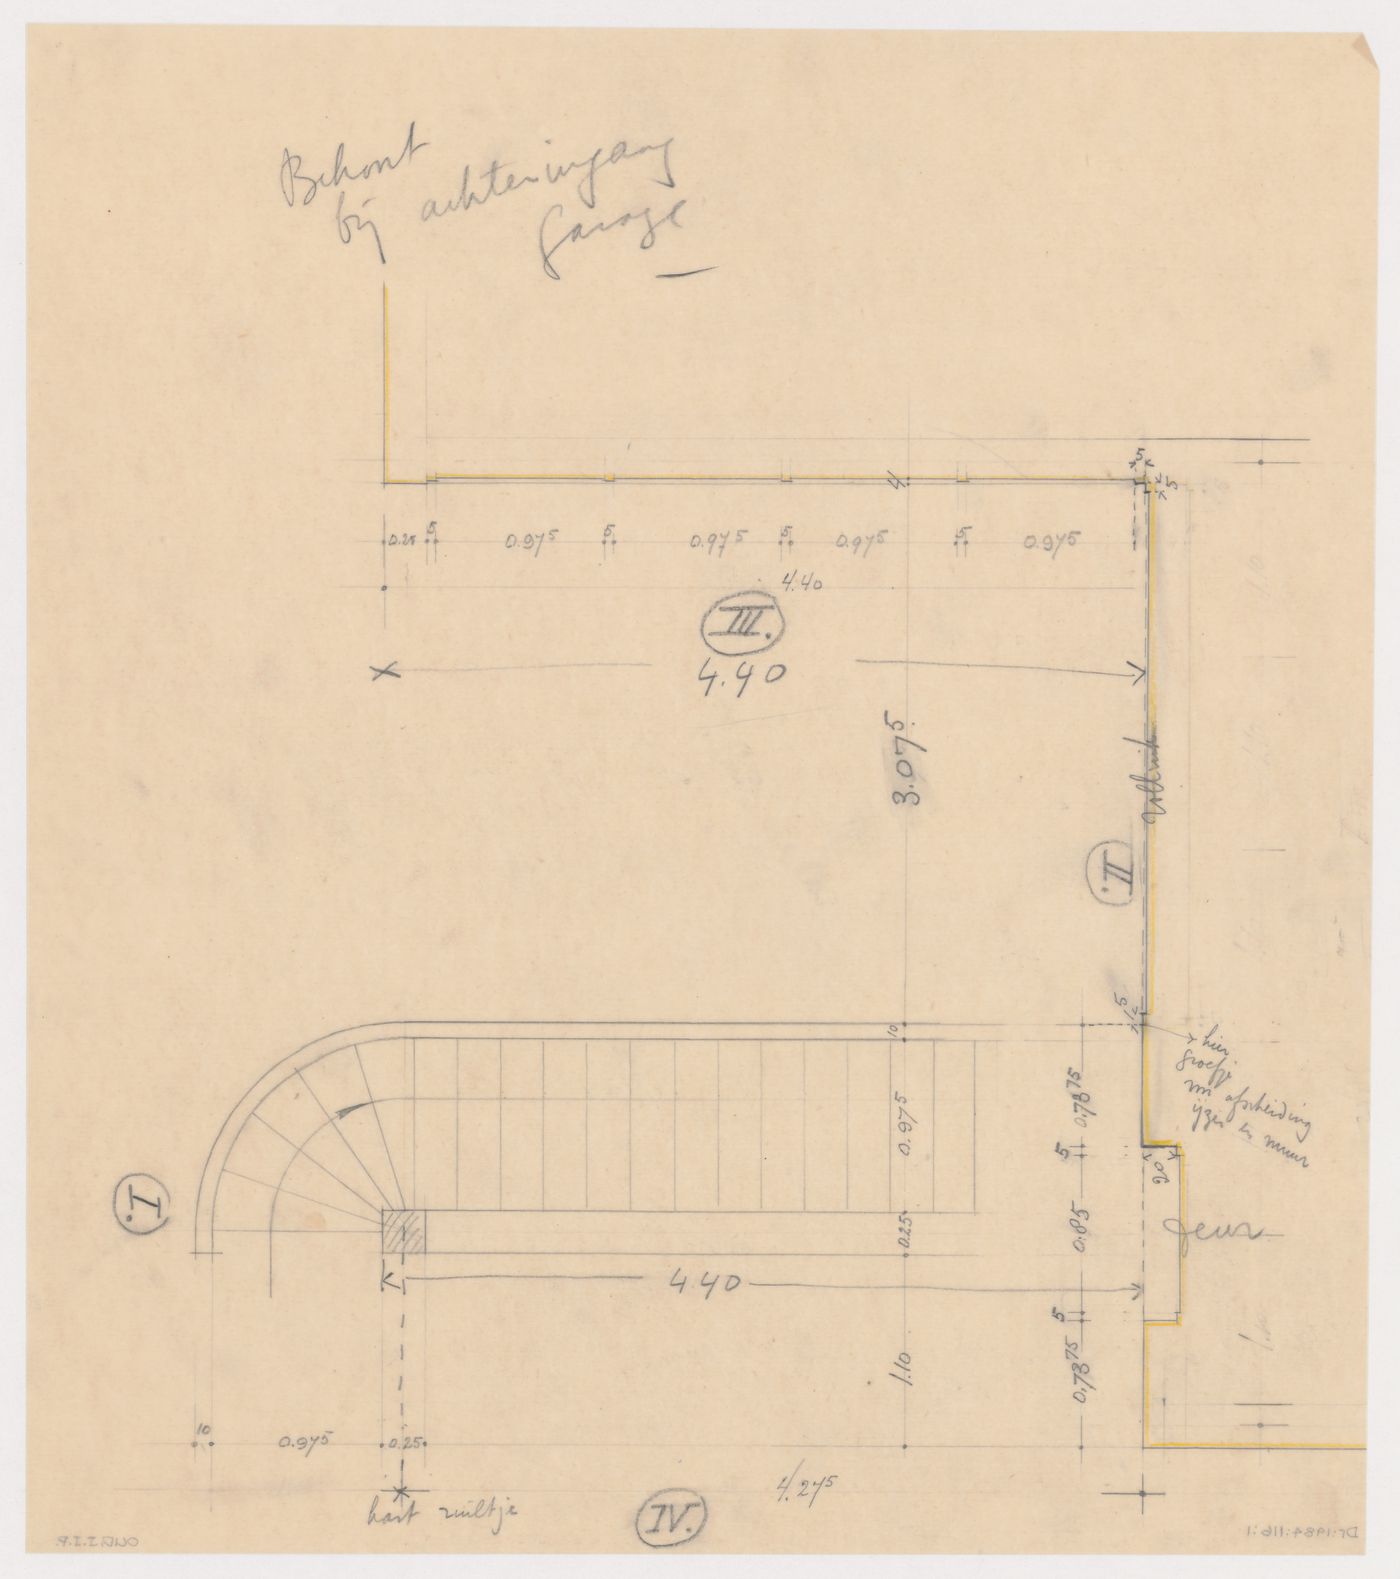 Plan for Johnson House, showing stair access to the garage from the adjoining terrace, Pinehurst, North Carolina